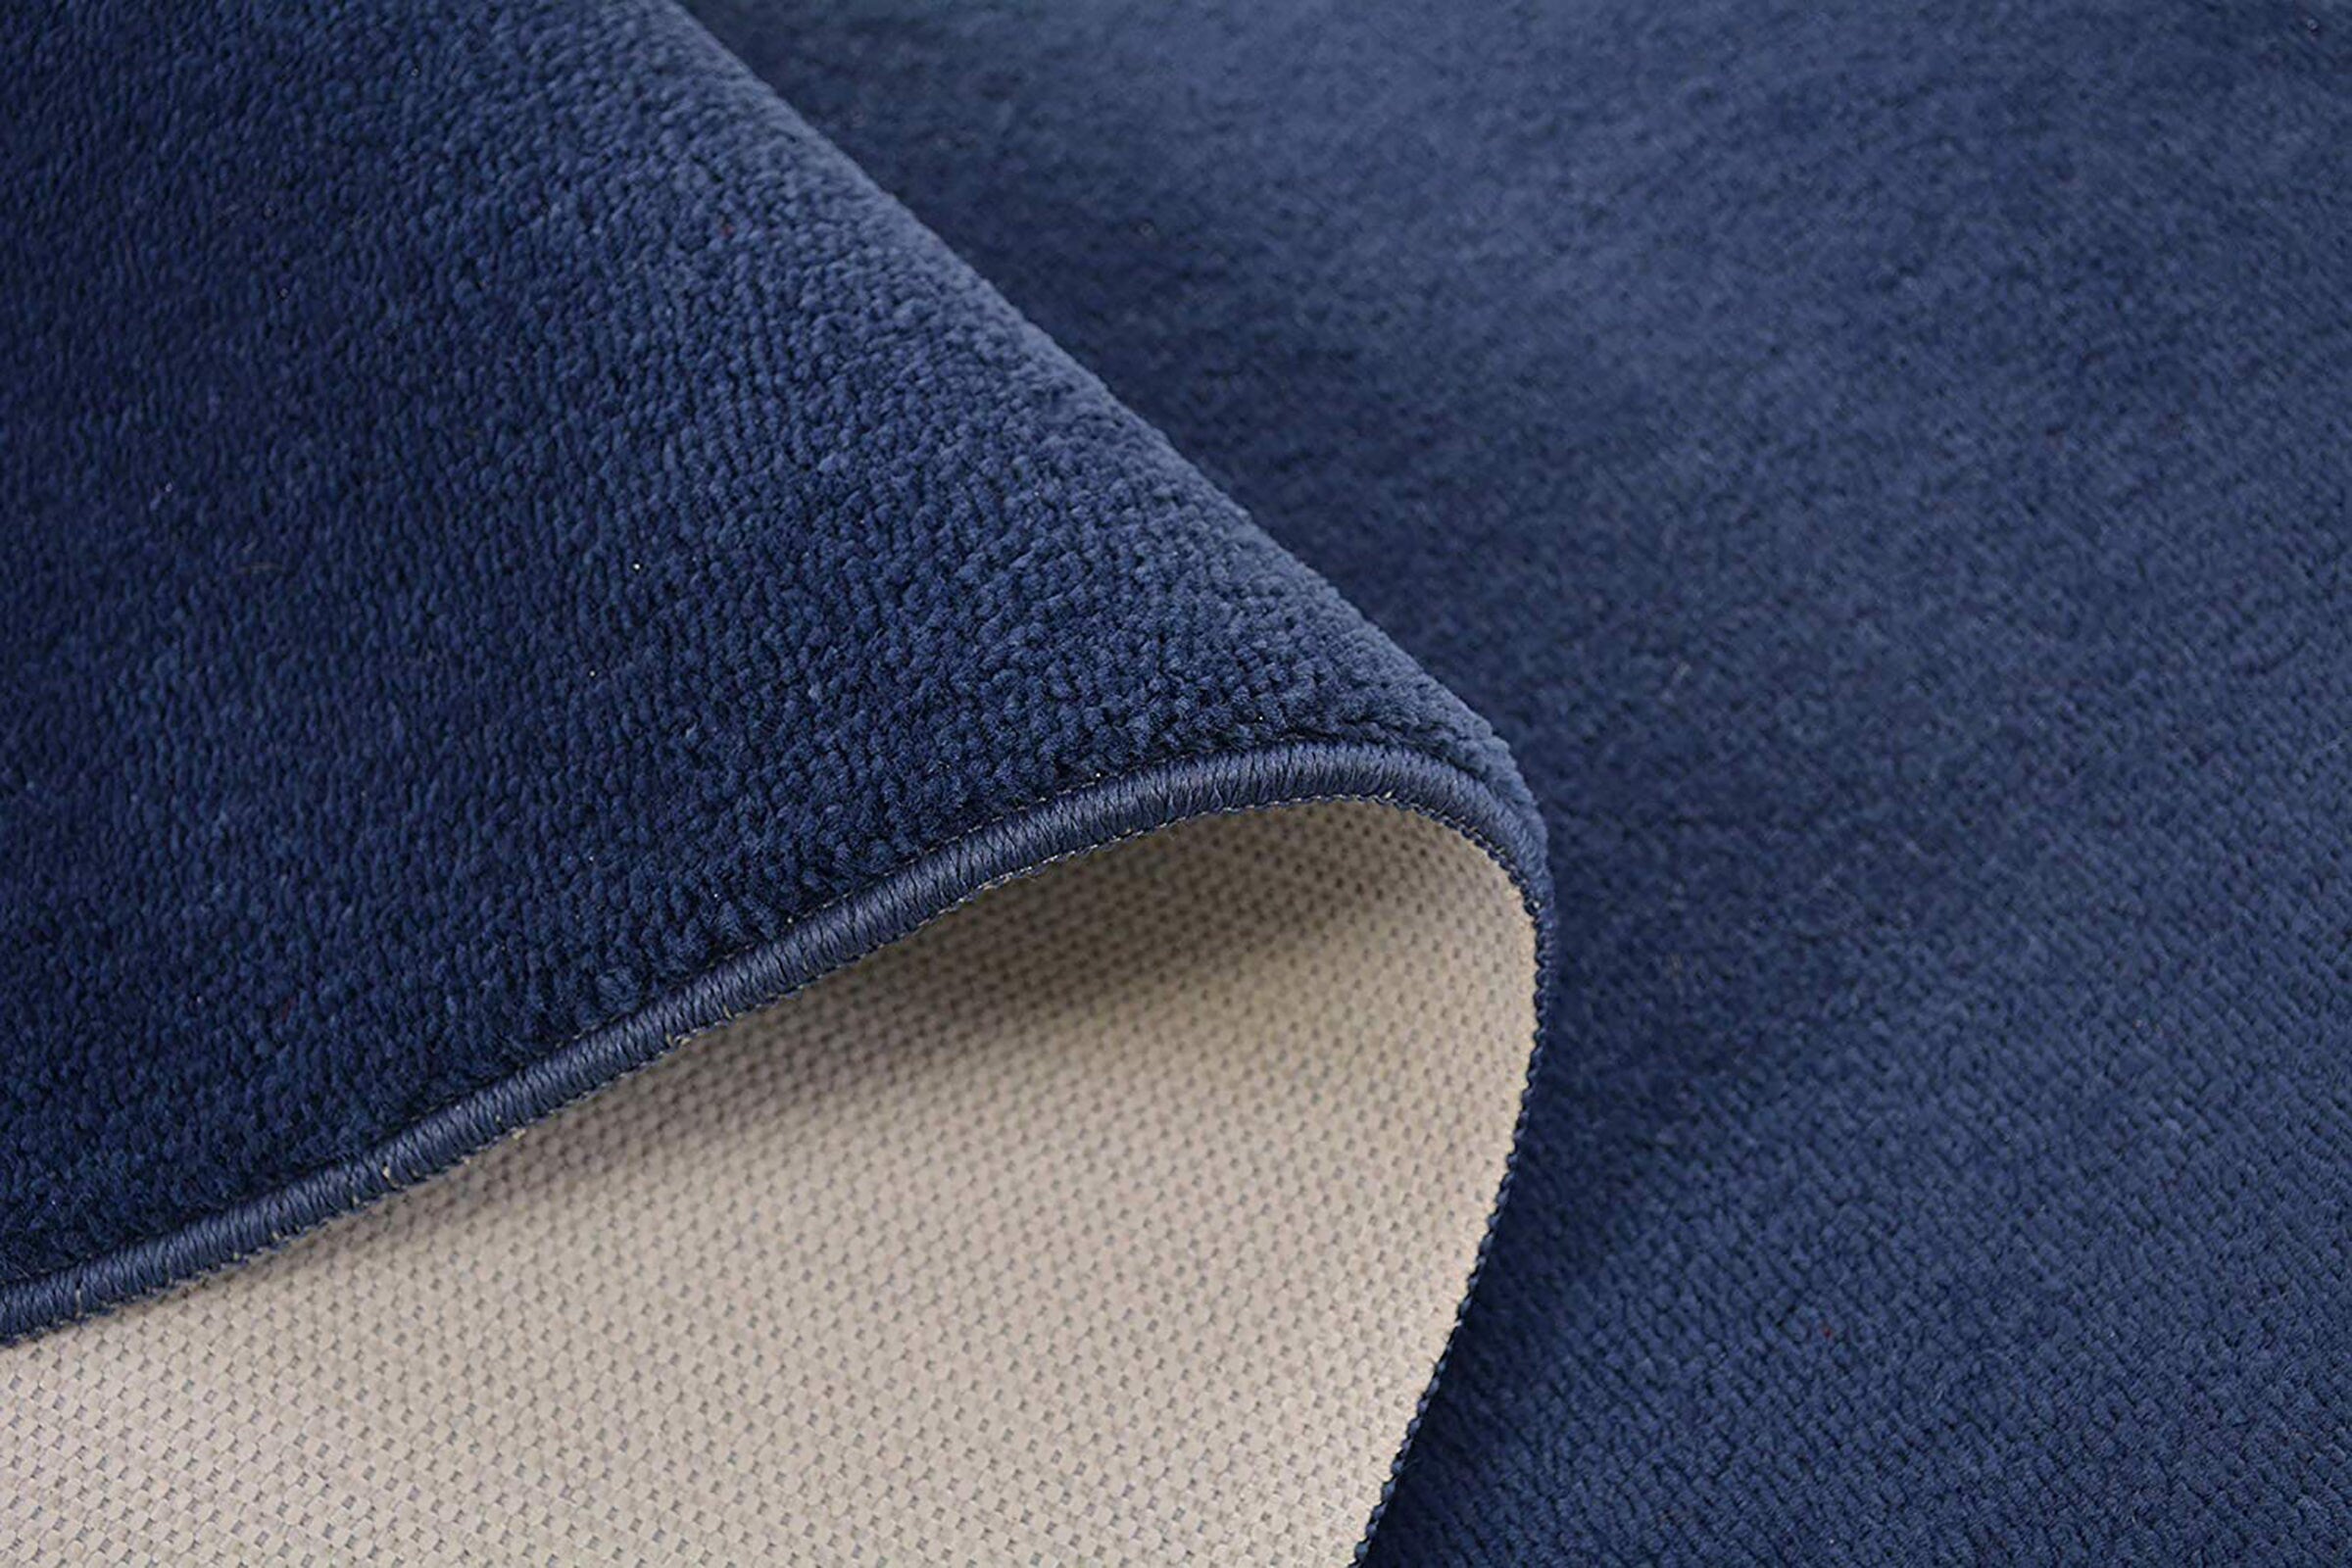 Machine Washable Custom Size Runner Rug Solid Navy Blue Color Skid Resistant Rug Runner Customize Up to 50 Feet and 26 Inch Width Runner Rug-10